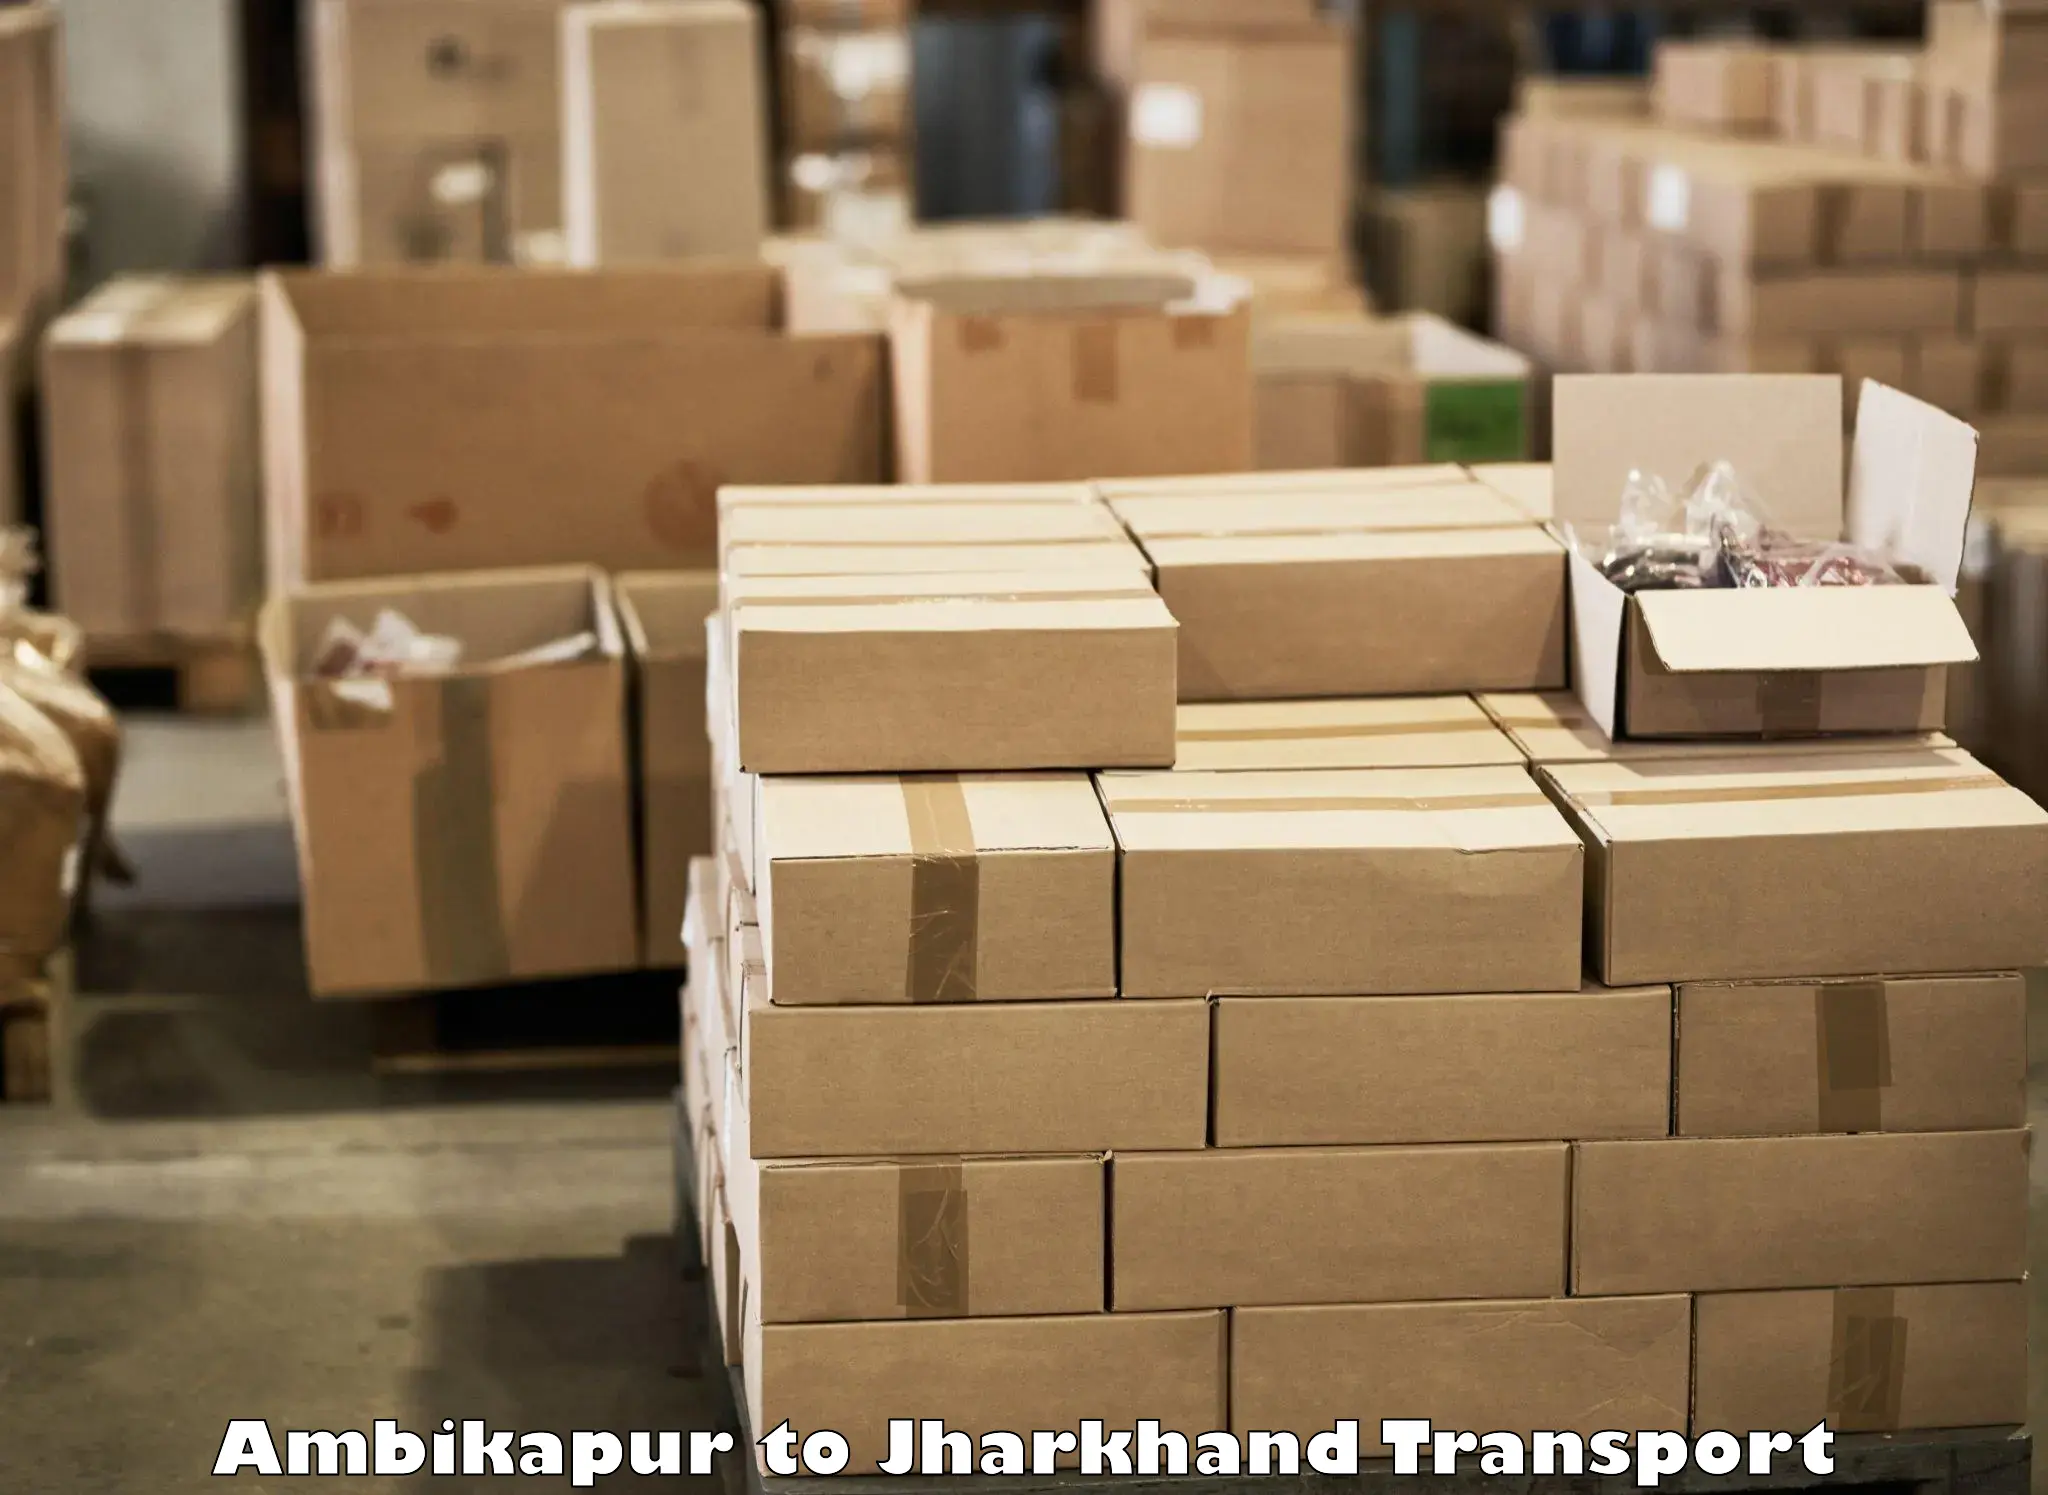 Container transportation services in Ambikapur to IIT Dhanbad